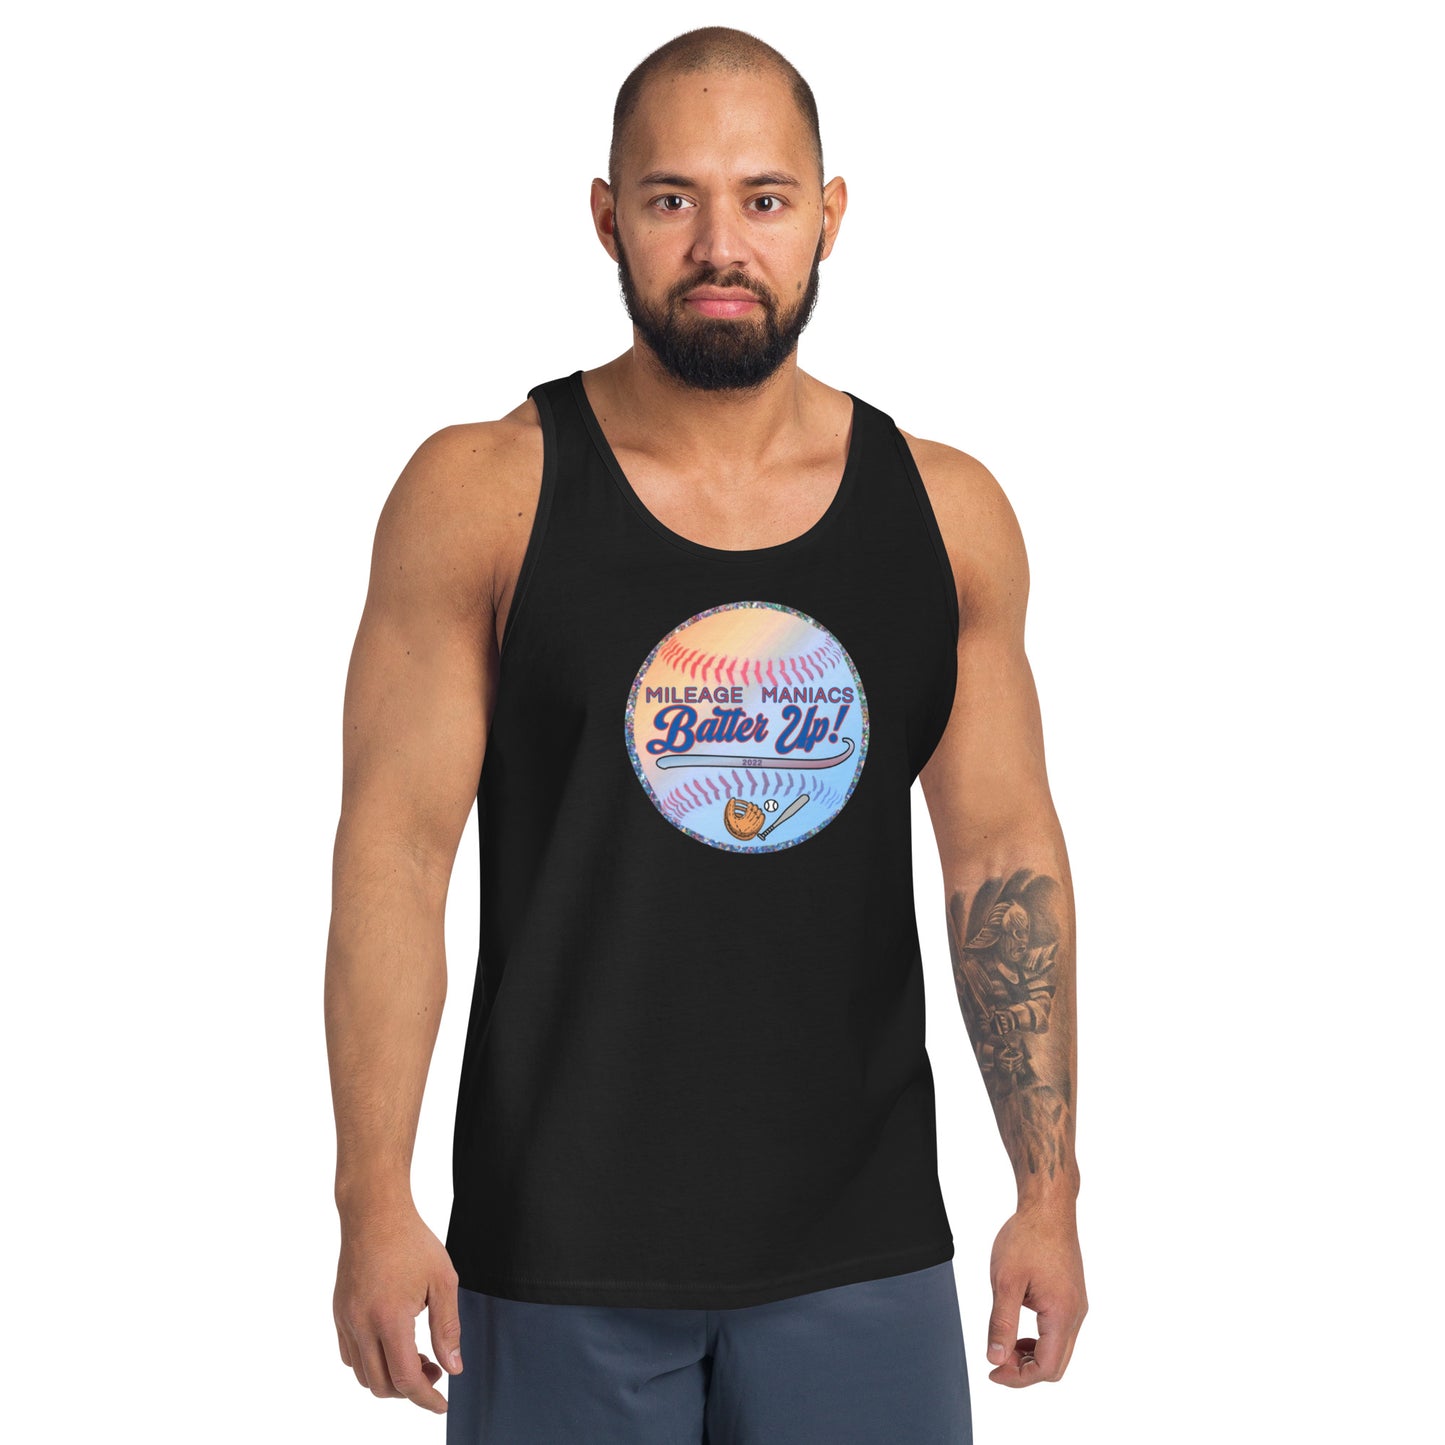 Mileage Maniacs Batter Up! - Unisex Tank Top